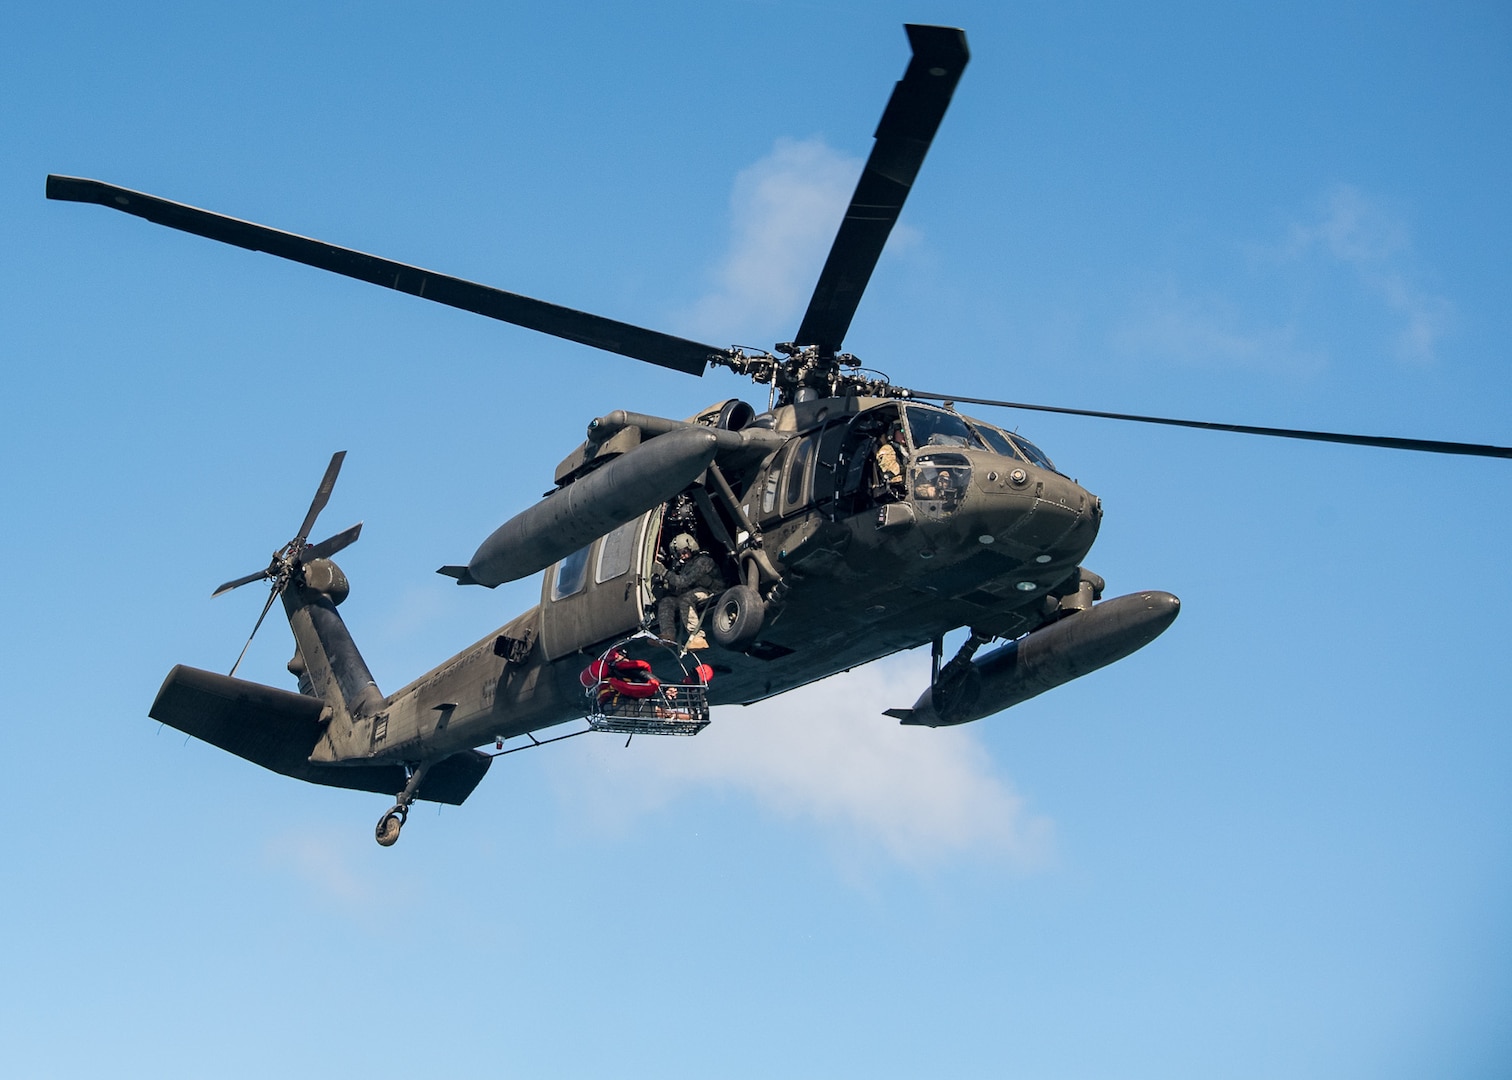 Joint Task Force-Bravo’s 1st Battalion, 228th Aviation Regiment spent the last year developing a robust overwater search-and-rescue, or SAR, program that brings a crucial, life-saving capability to JTF-Bravo.